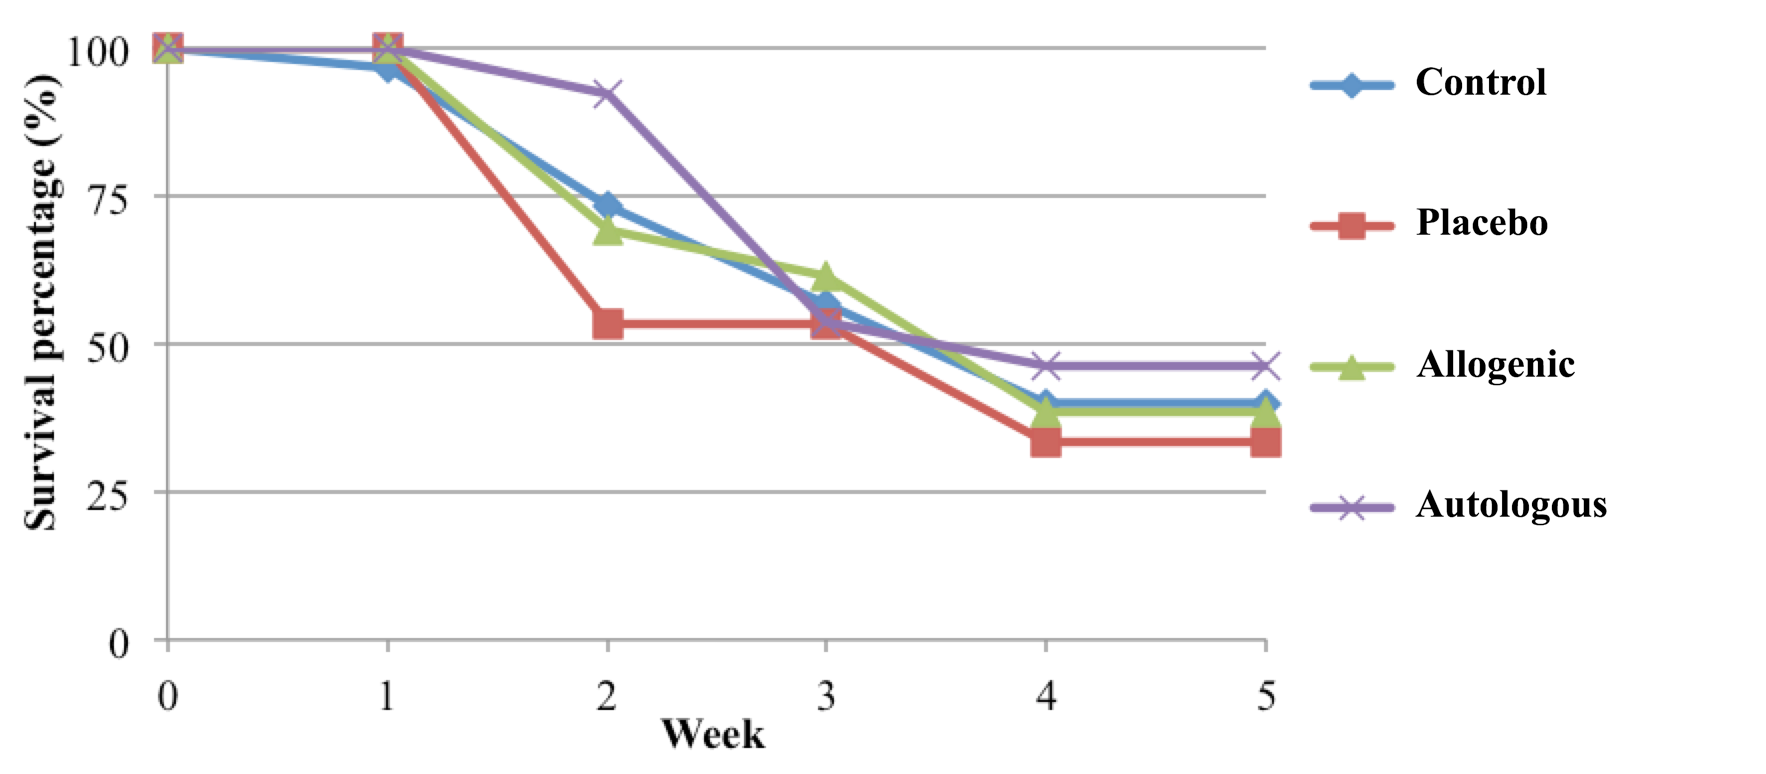 Figure 1
Survival rate of mice with SCI after various treatments